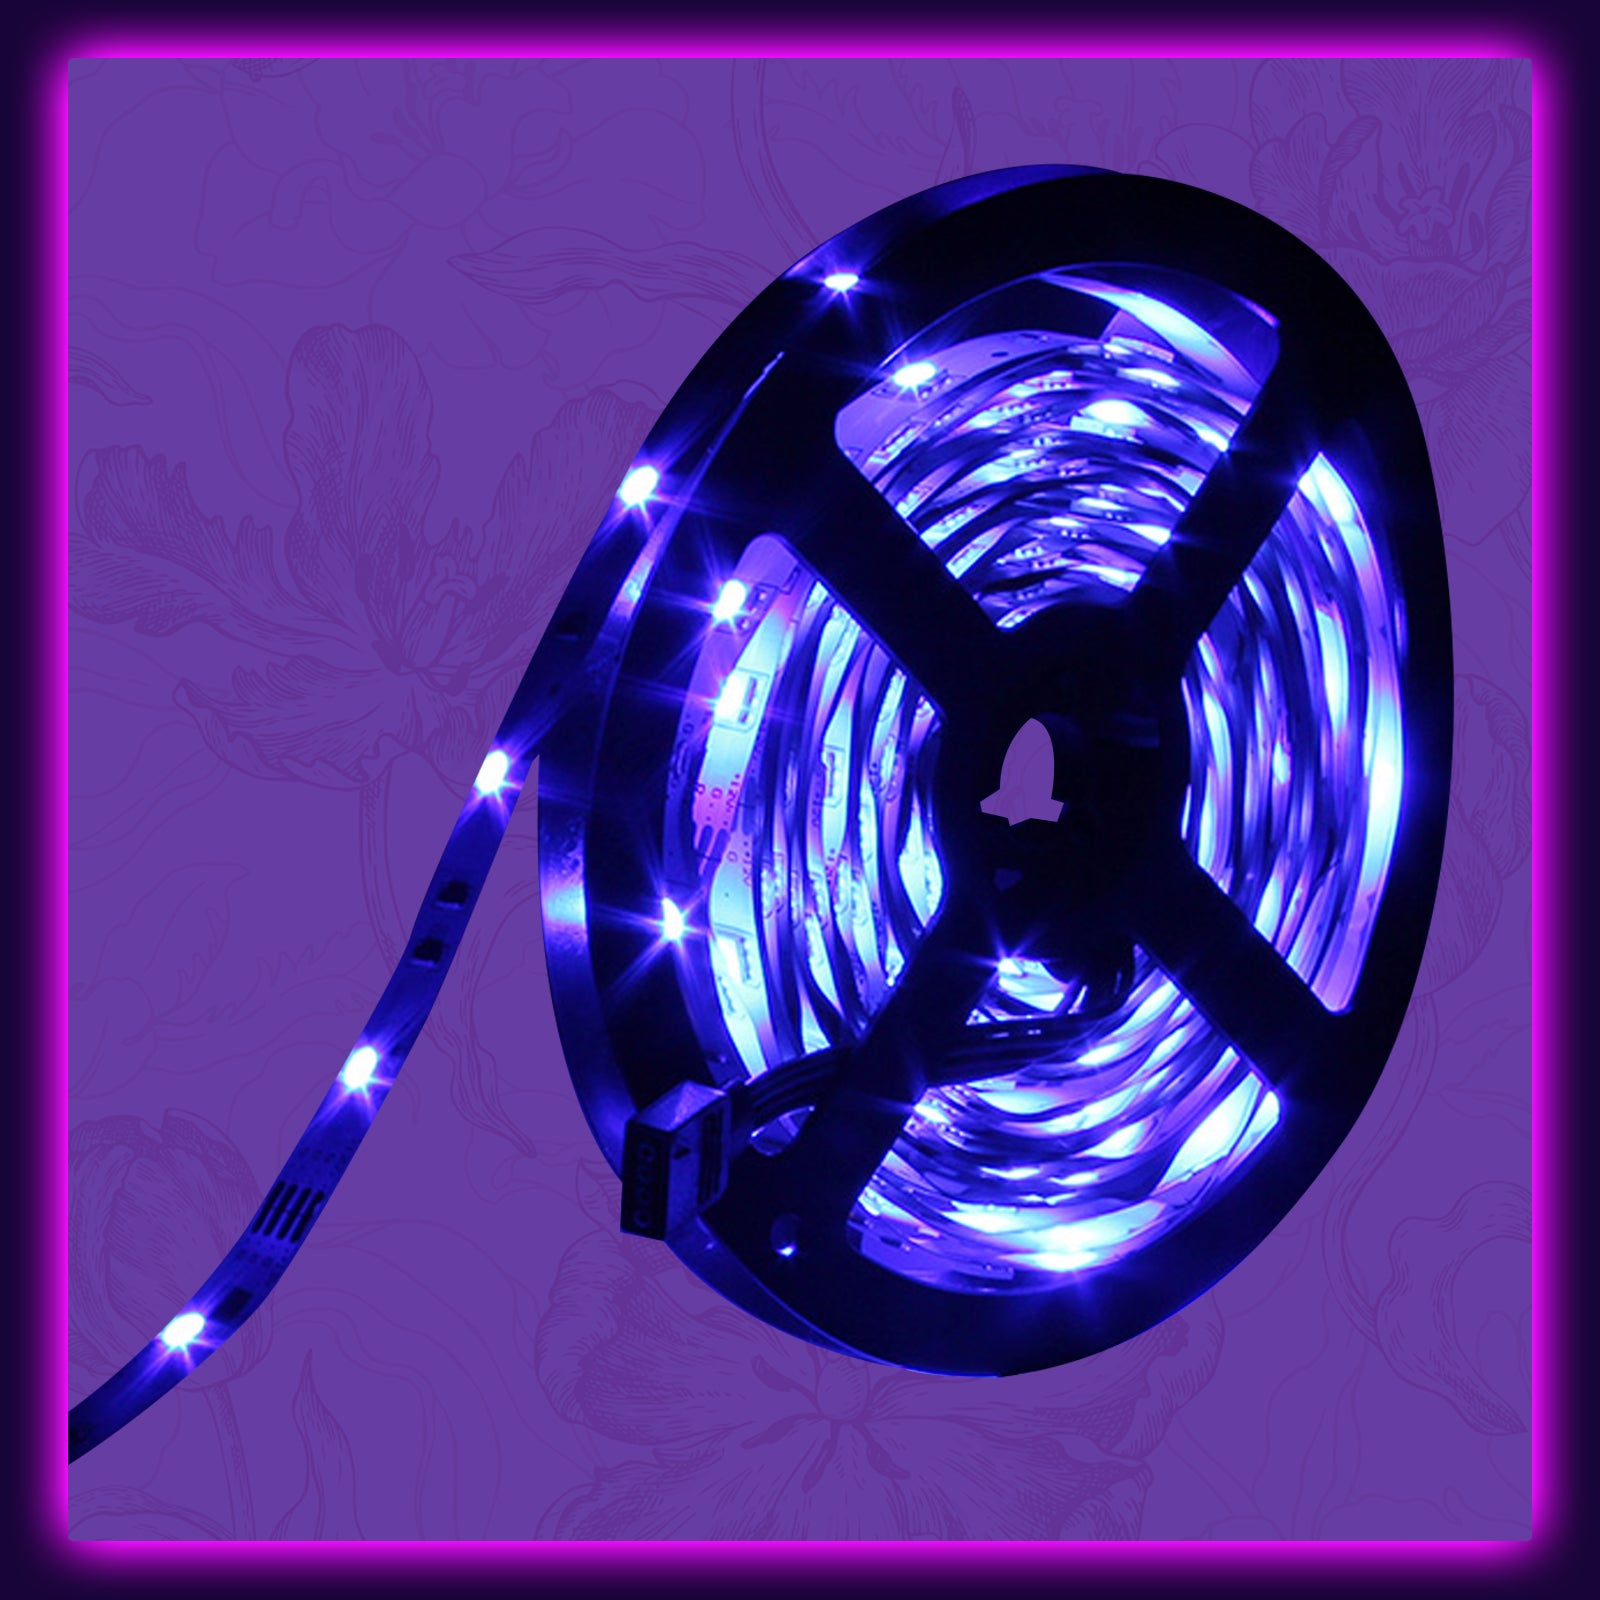 SUPERNIGHT RGB LED Strip Light, 16.4ft Color Changing Rope Lights Non-Waterproof Tape with SMD 5050 LEDs for Bedroom, TV Backlighting, Kitch, Christmas, Father's Day, Indoor Decoration